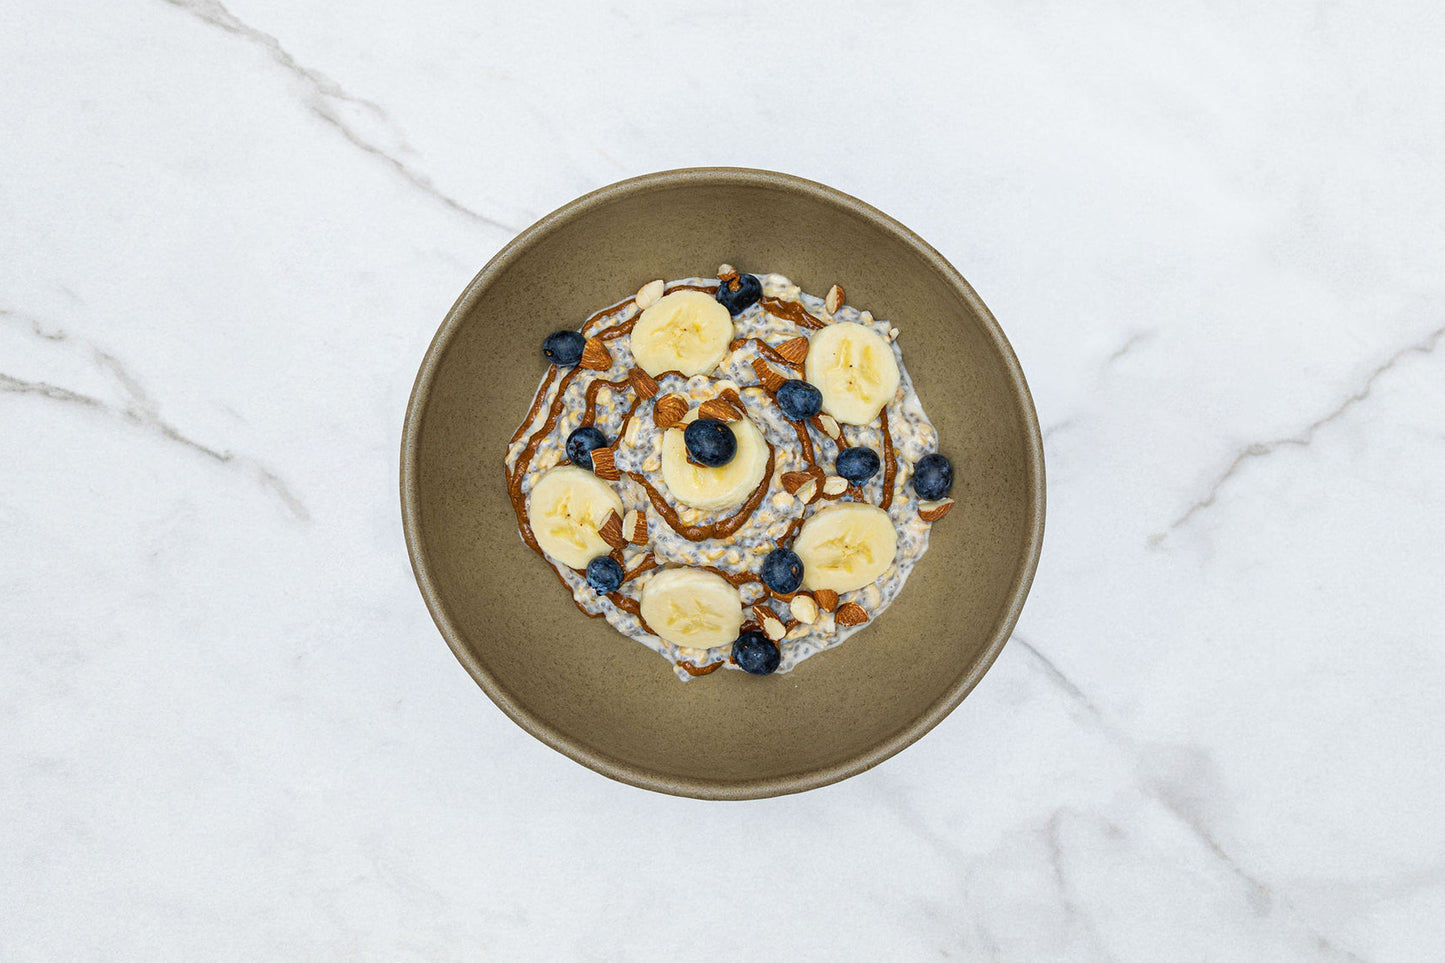 Chia Overnight Oats Topped with Almond Butter, Banana, and Blueberry